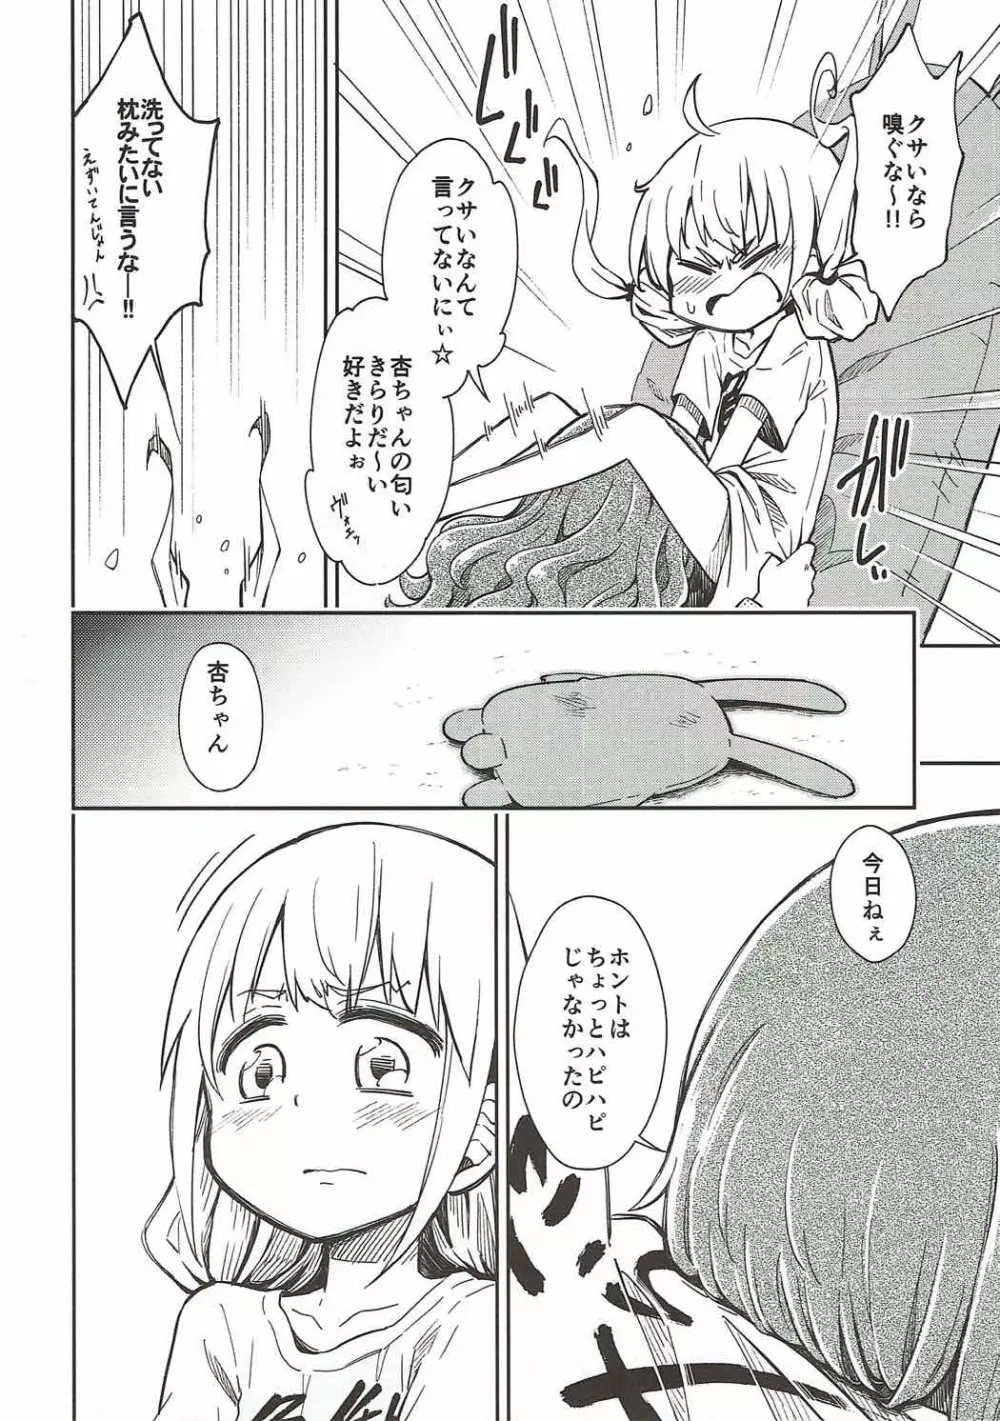 Lovely Girls' Lily vol.16 - page7